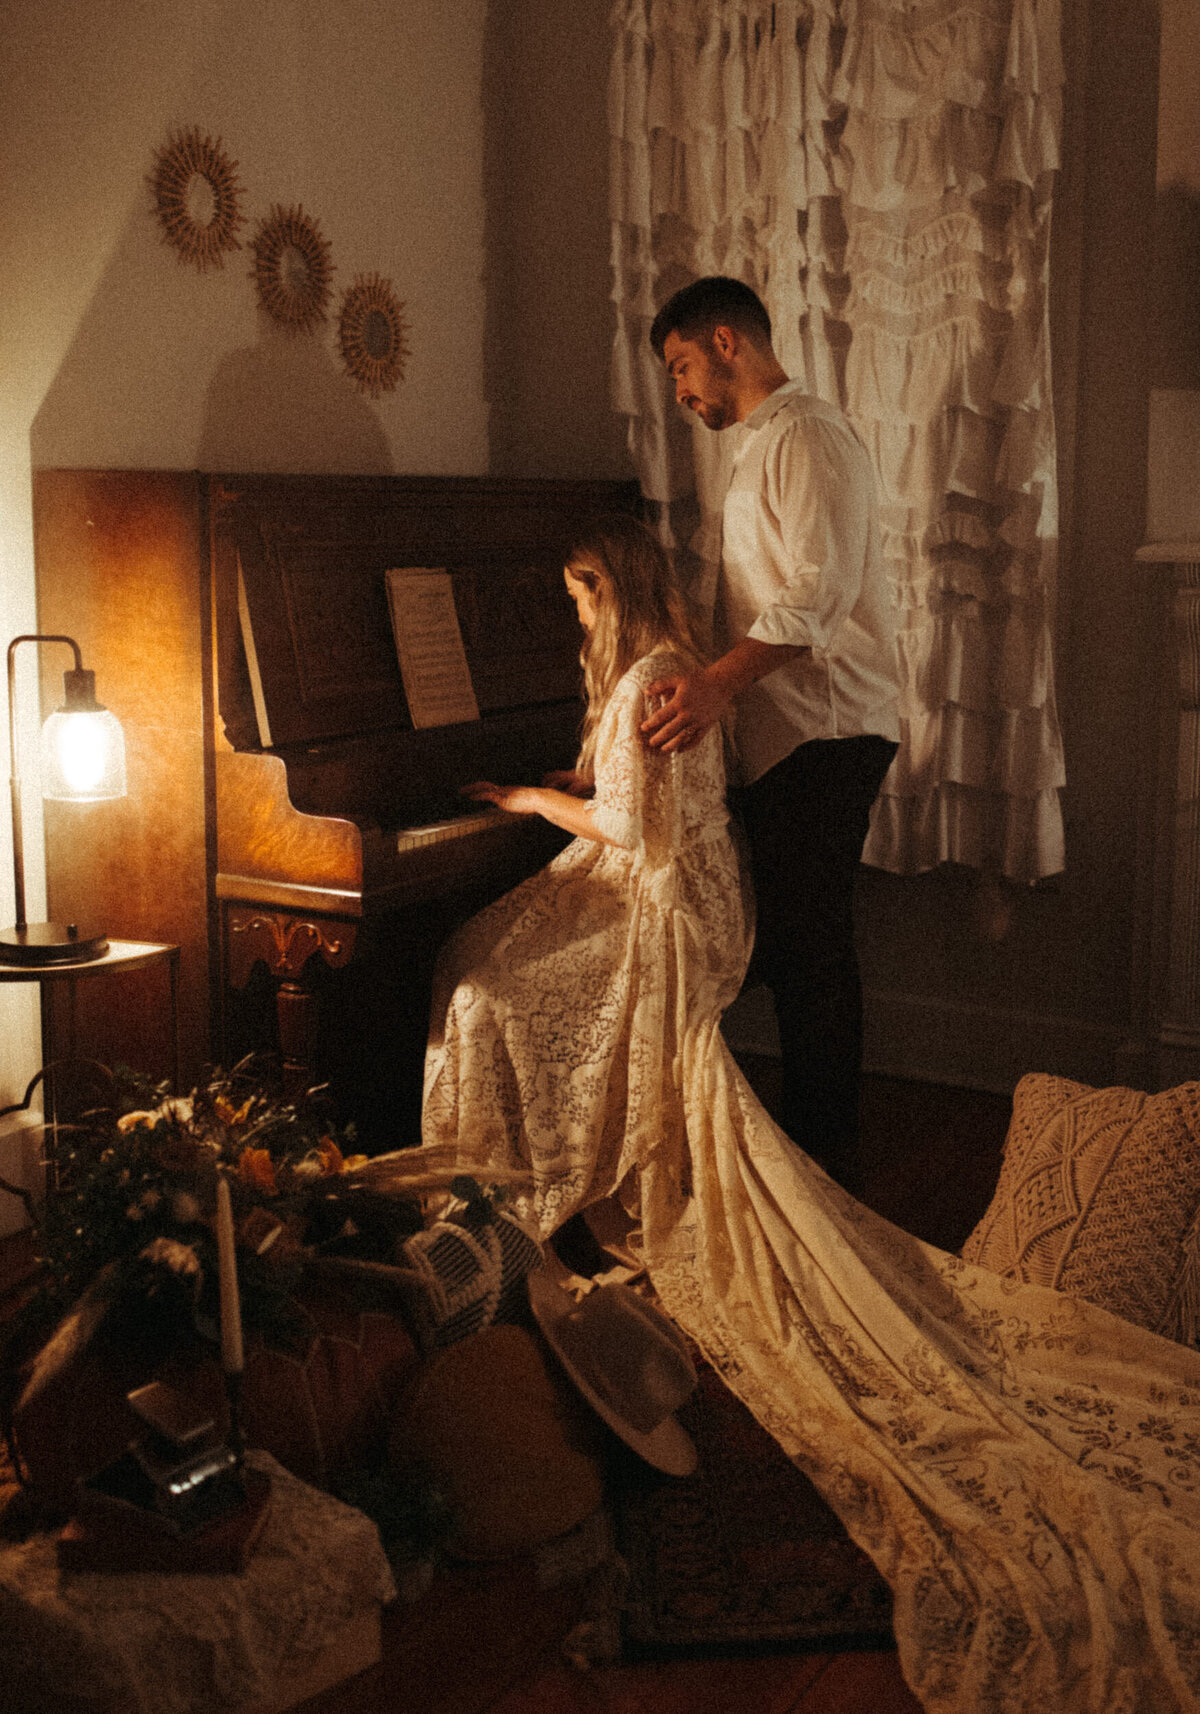 Boho bride playing piano at Airbnb during their elopement reception